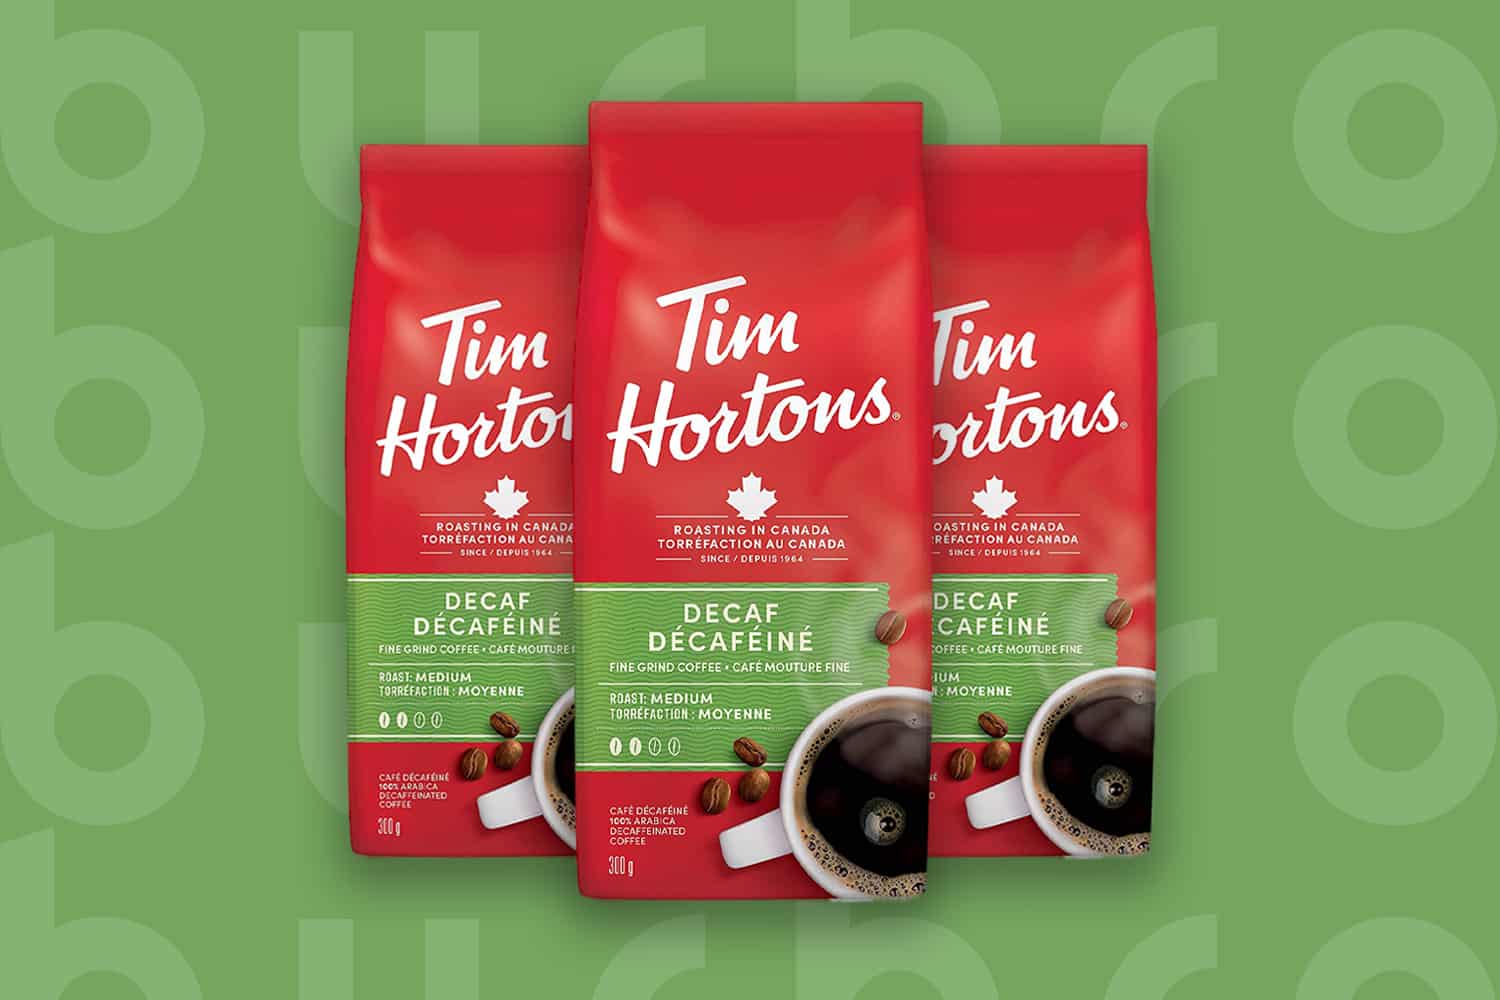 This is the cover photo for our Best Decaf Coffee article. It features 3 red bags of Tim Hortons coffee overlaid on a fresh green background with an embossed Burbro logo.